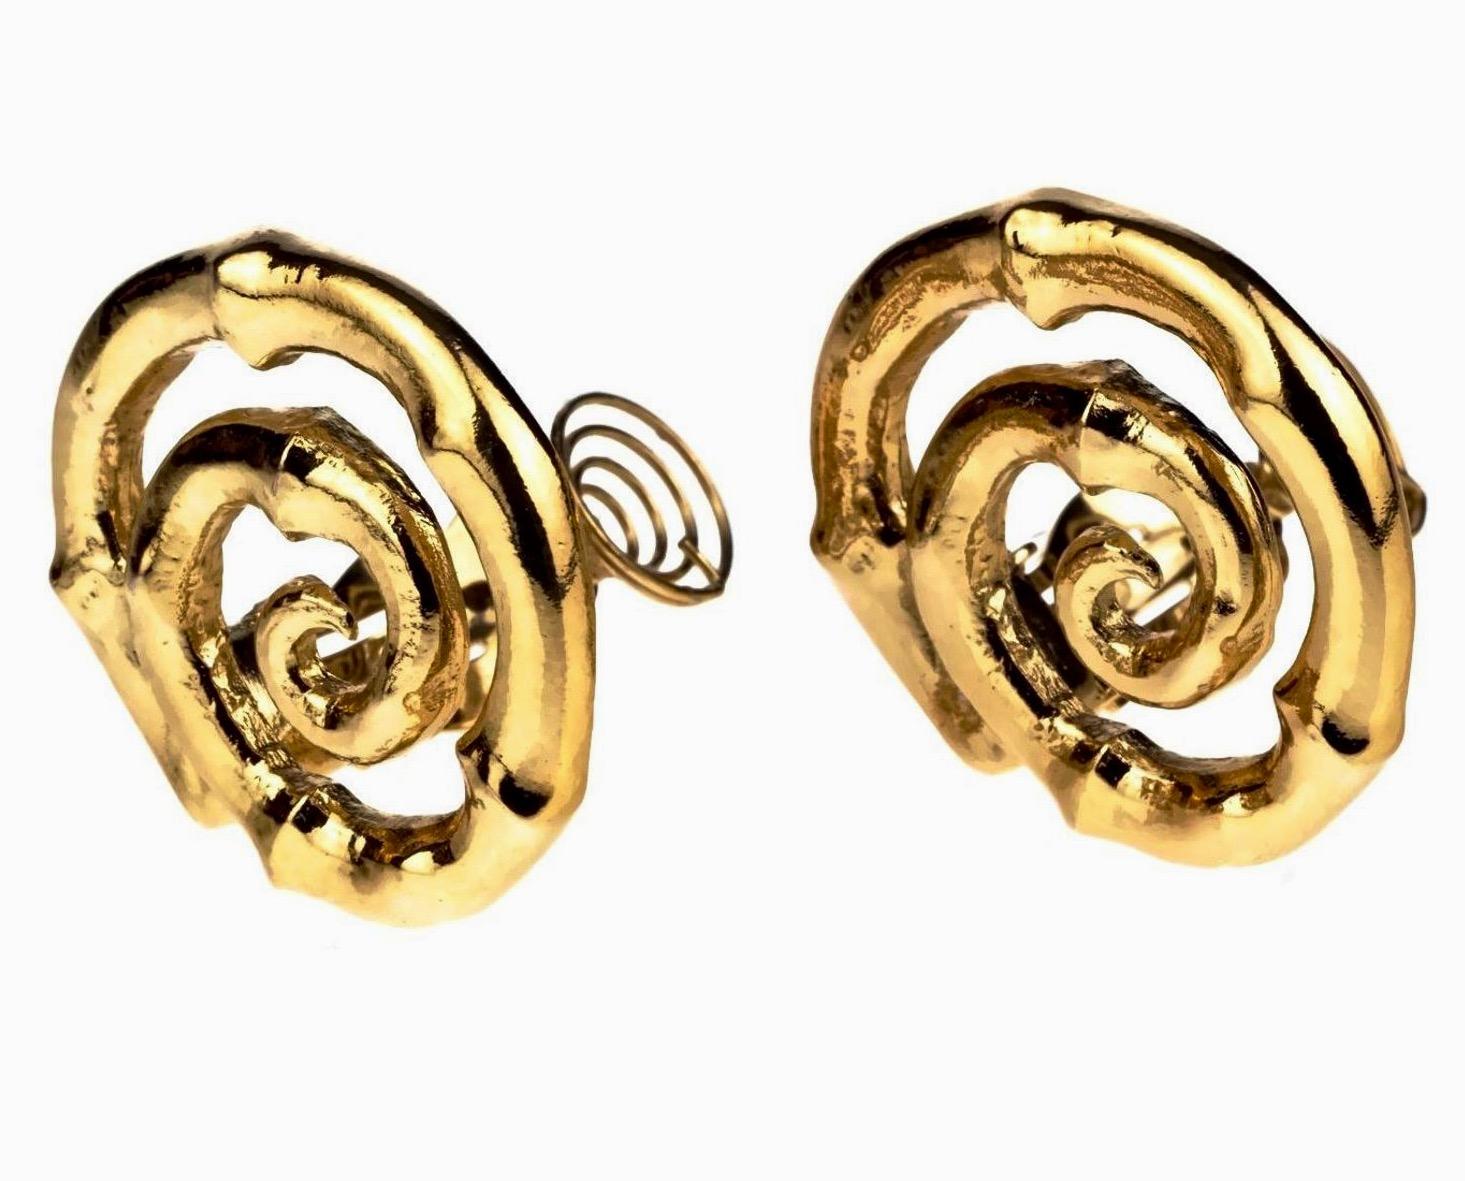 Vintage YVES SAINT LAURENT Ysl Bamboo Spiral Earrings In Excellent Condition For Sale In Kingersheim, Alsace